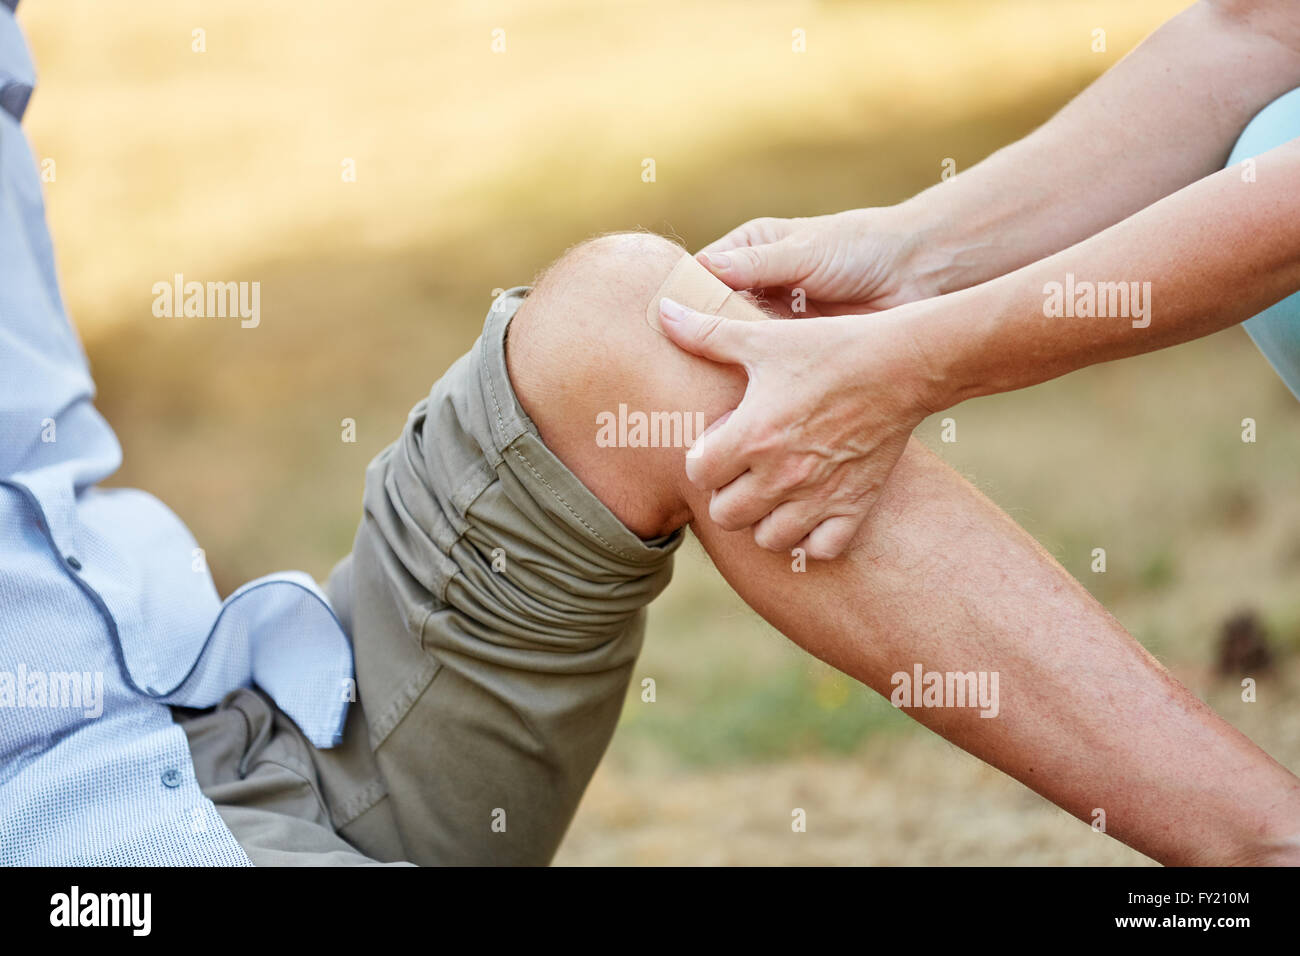 Woman puts a band aid on an injured knee and helps the man Stock Photo